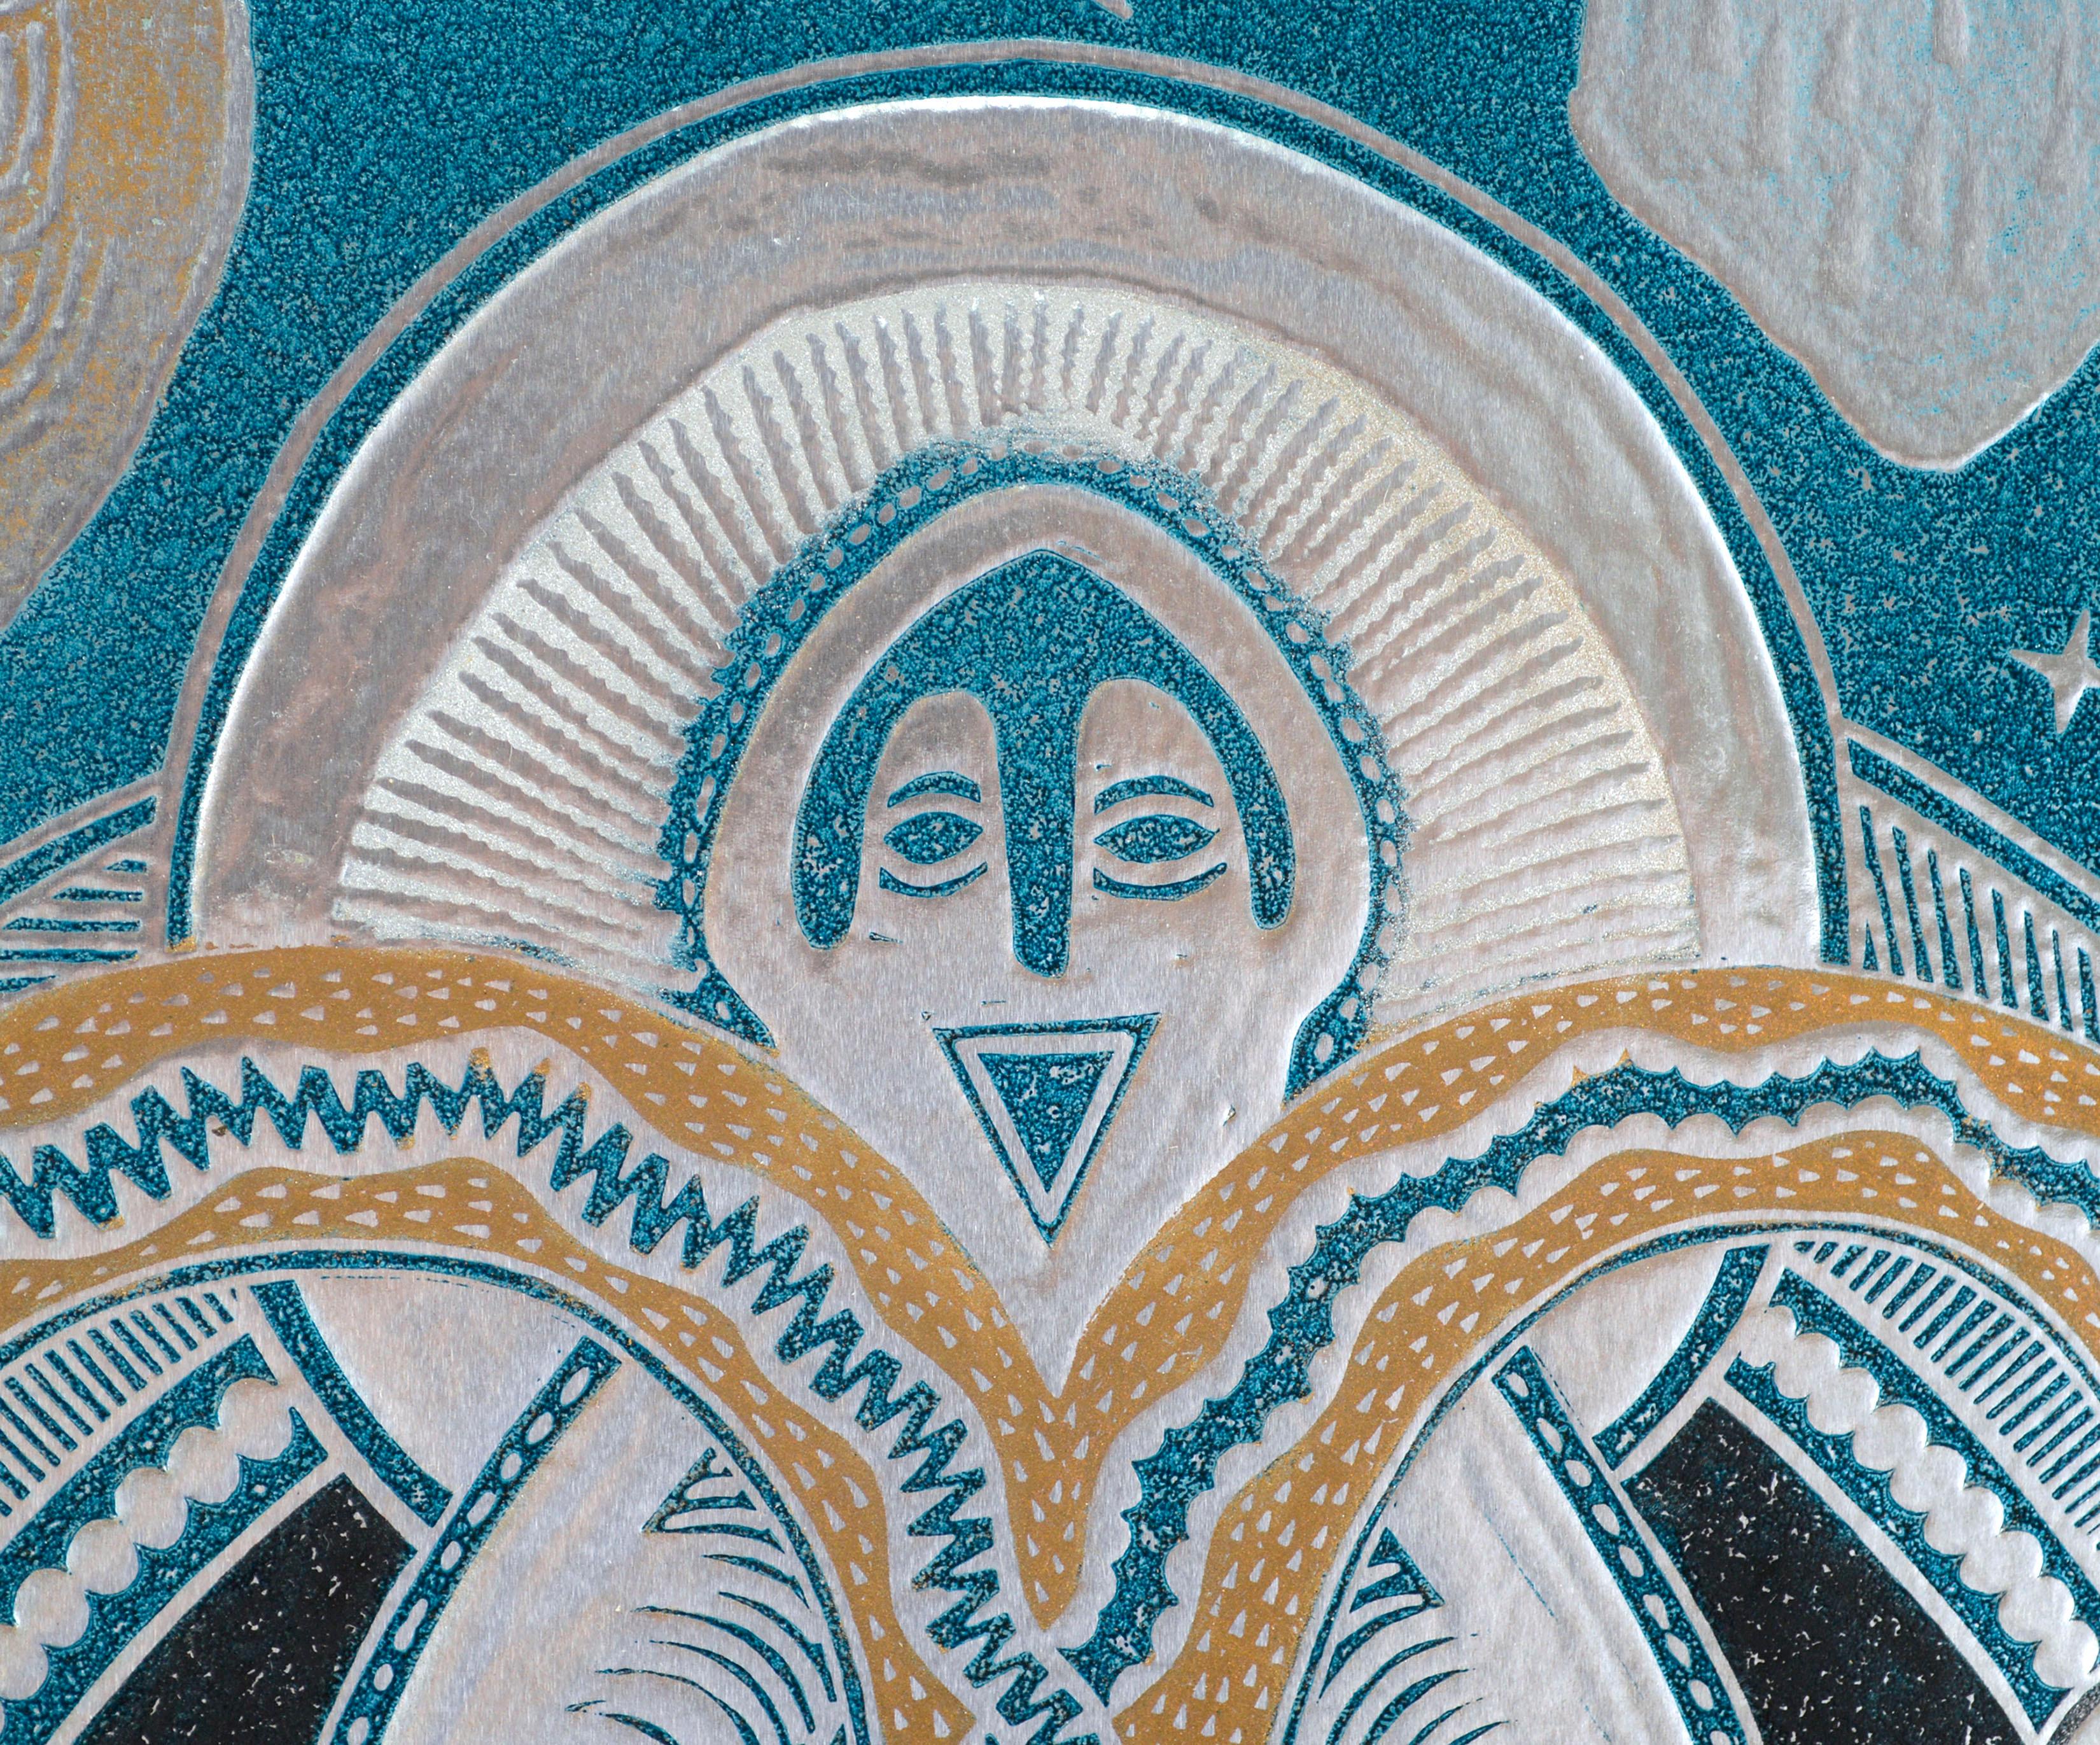 Gavrinis Earth Goddess, Psychedelic Visionary Metallic Reversible Print, 1/75 - Gray Figurative Print by Ian McNeil Cooke 